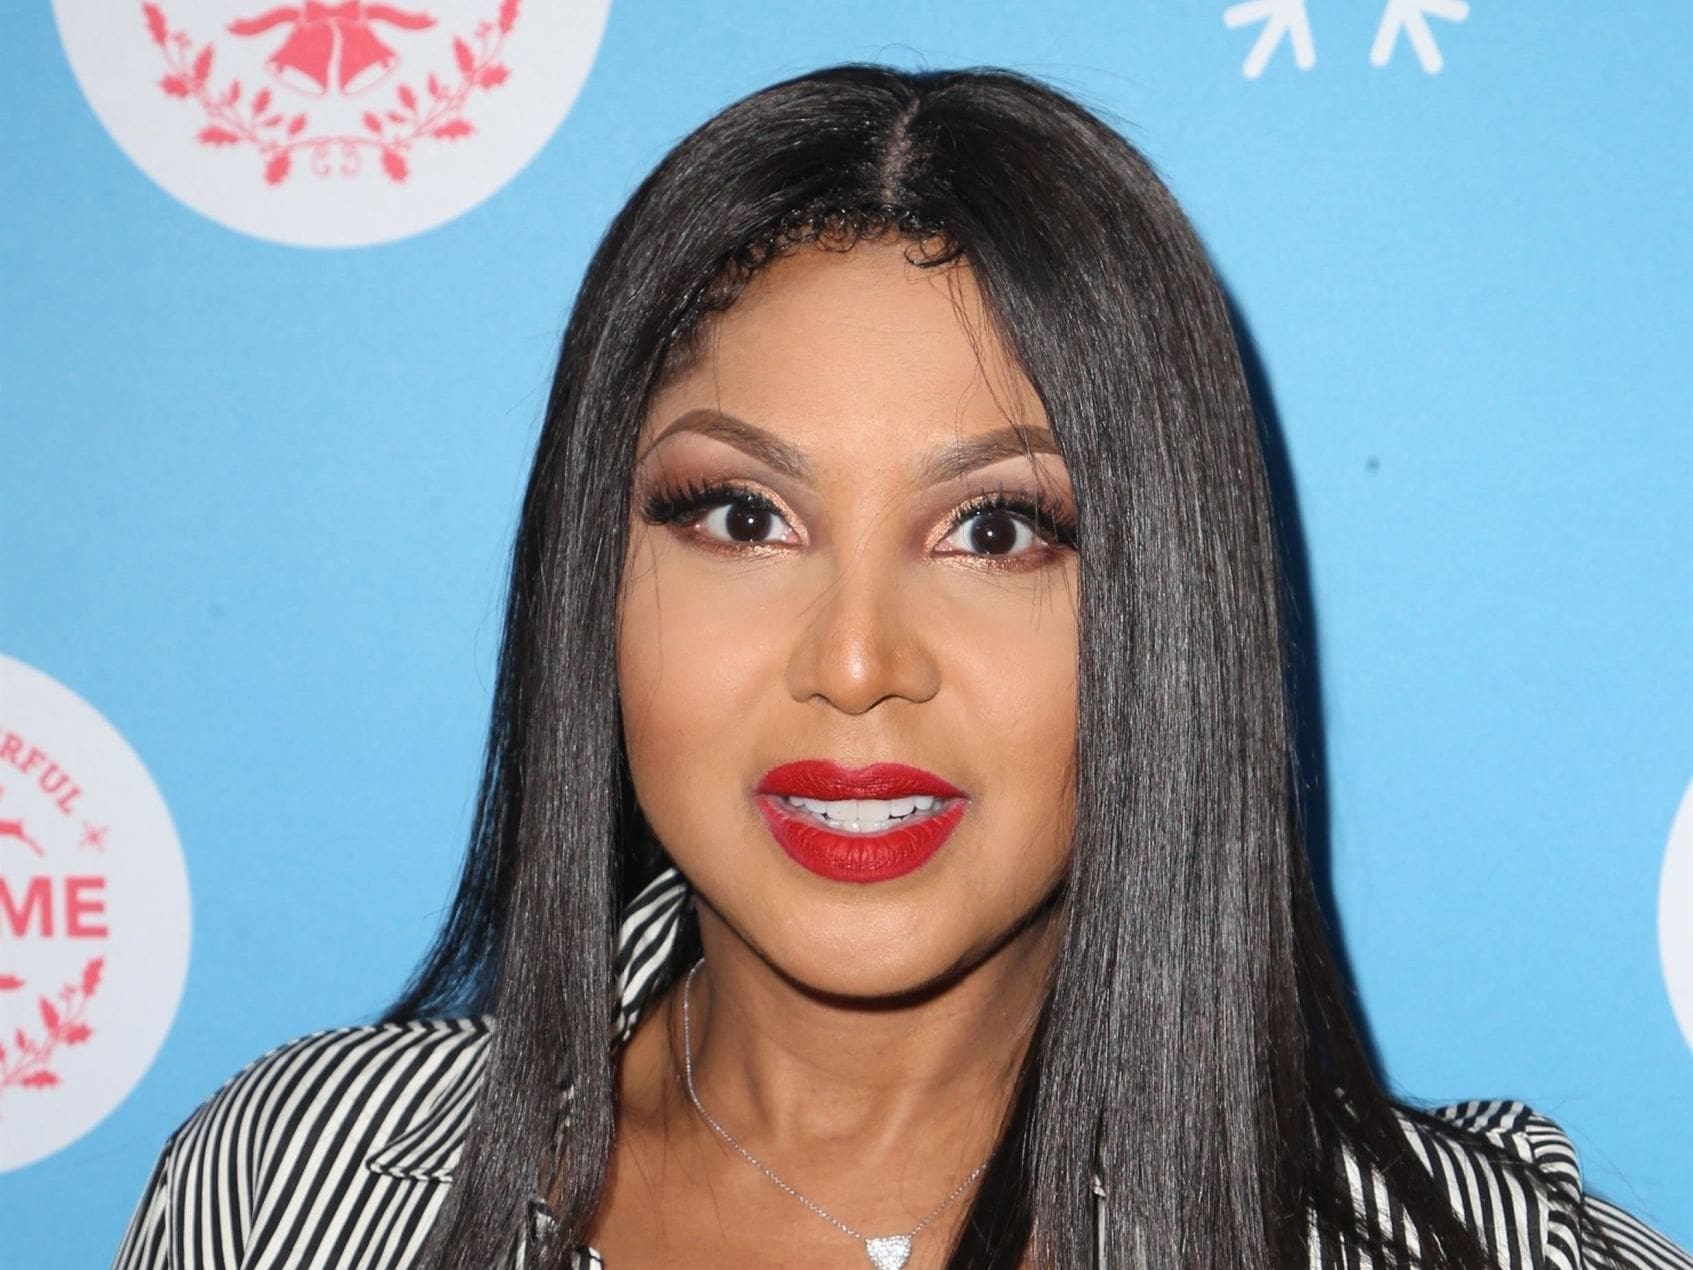 Toni Braxton Reveals The Lyrics To Her New Song 'Do It' And Fans Are In Awe: 'Every Lyric Spells Sincerity'